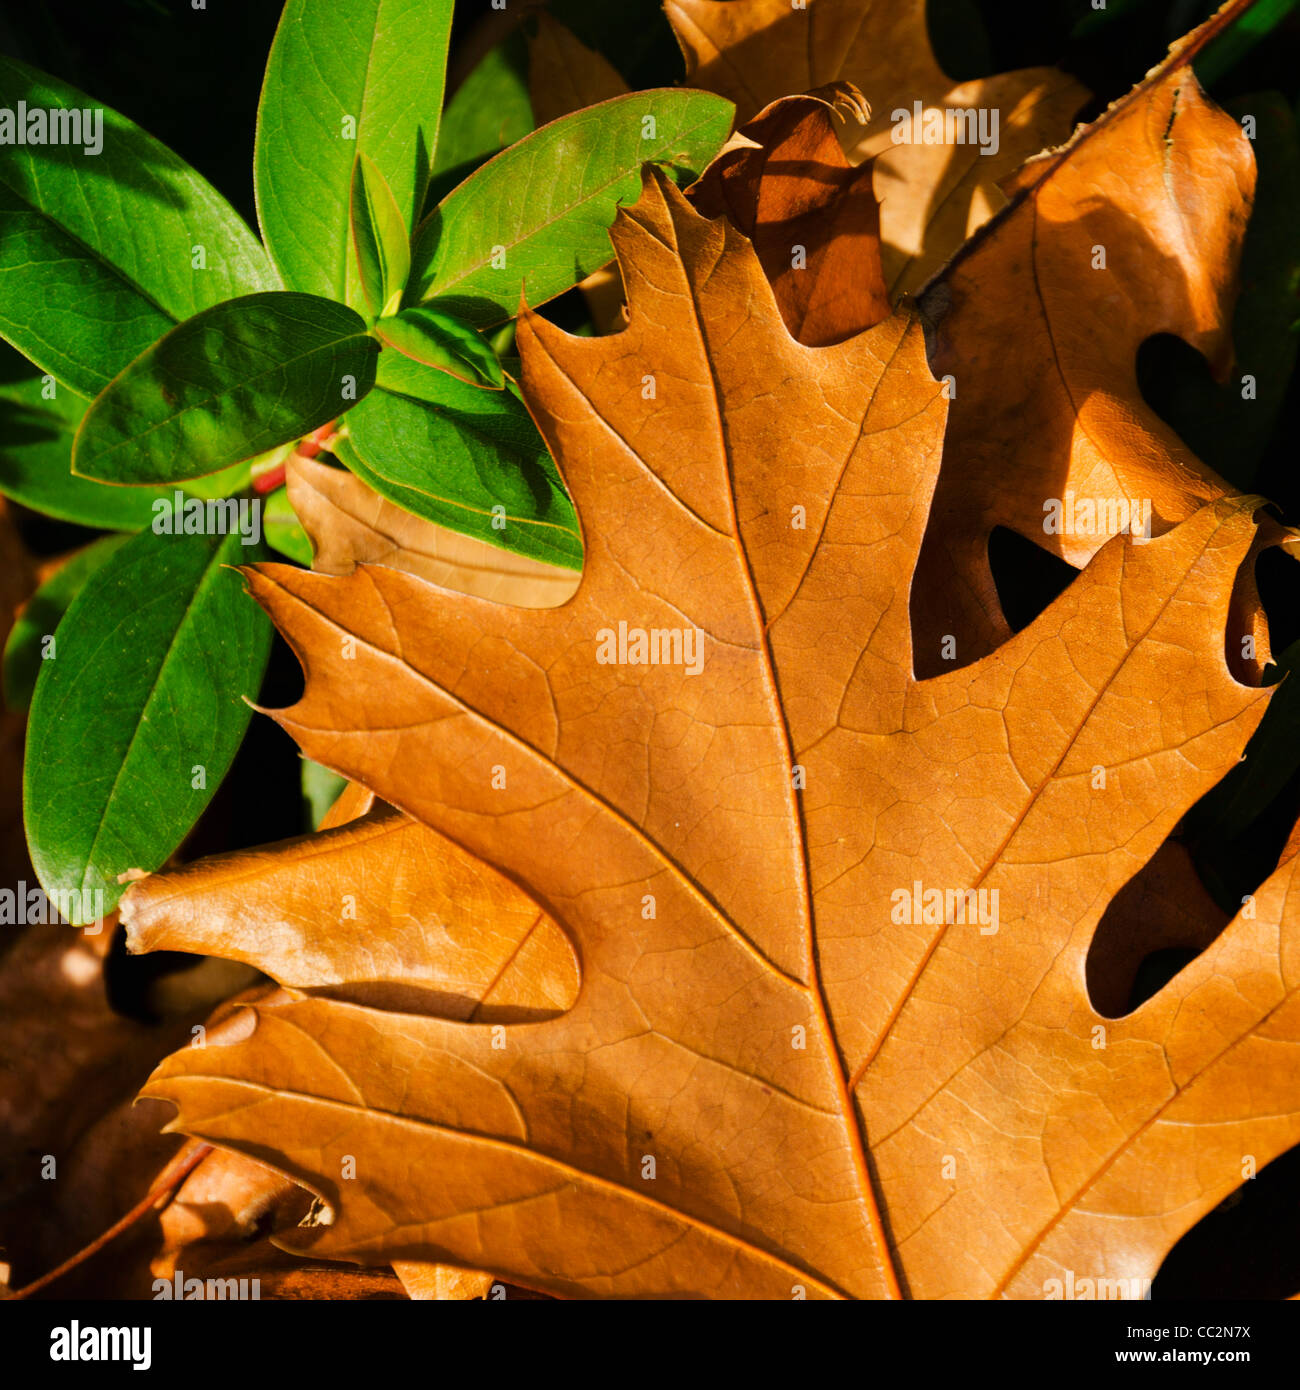 Close-up of brownish and green leaves Stock Photo